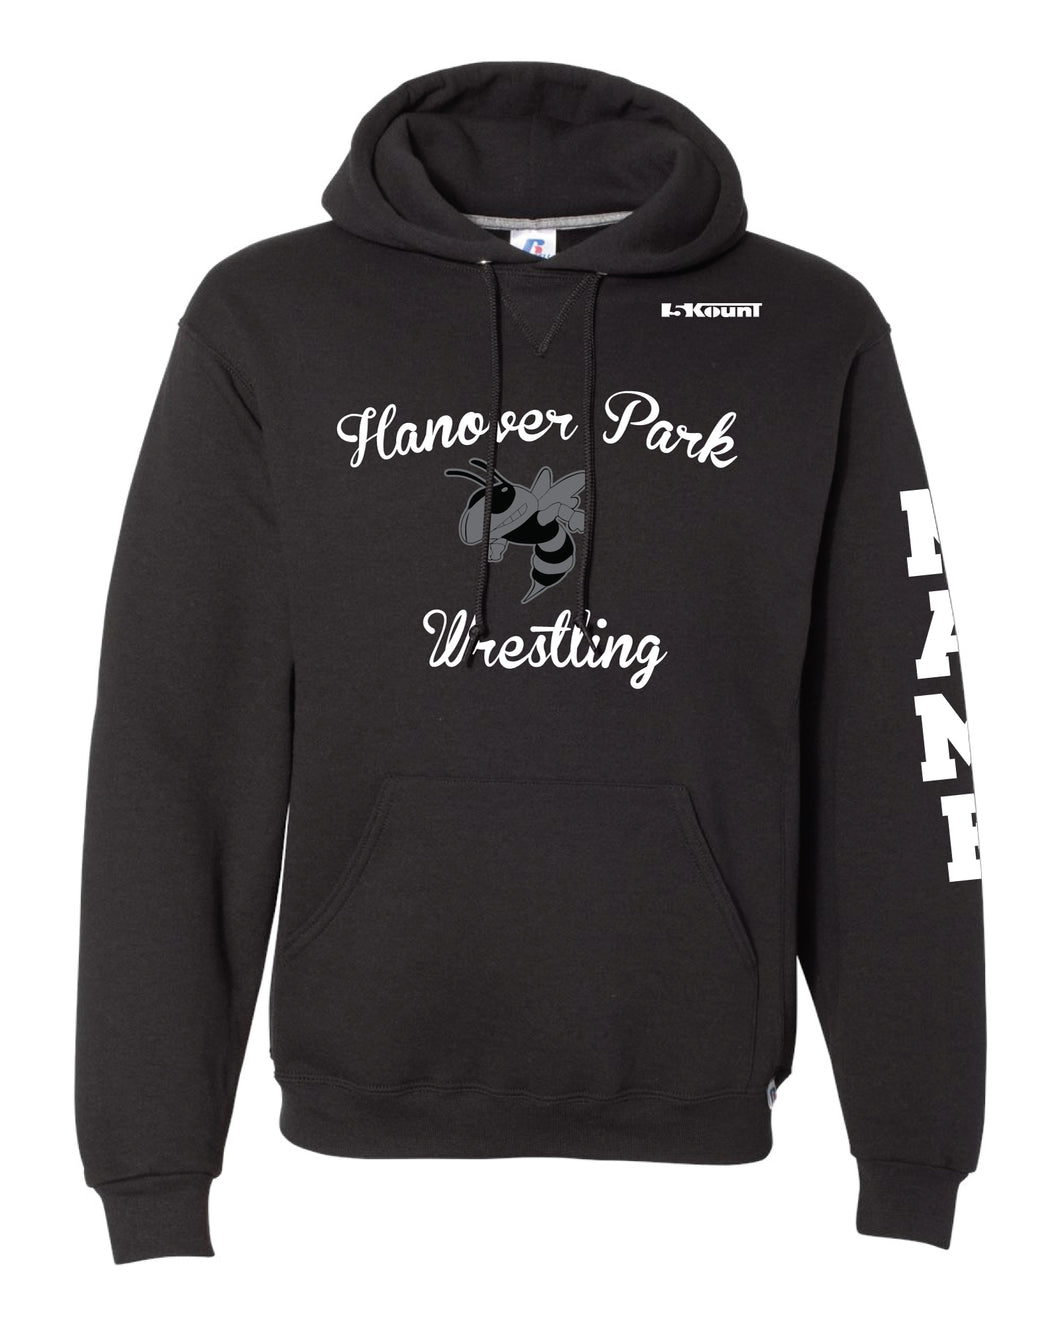 Hanover Park Youth Wrestling Russell Athletic Cotton Hoodie - Black - 5KounT2018